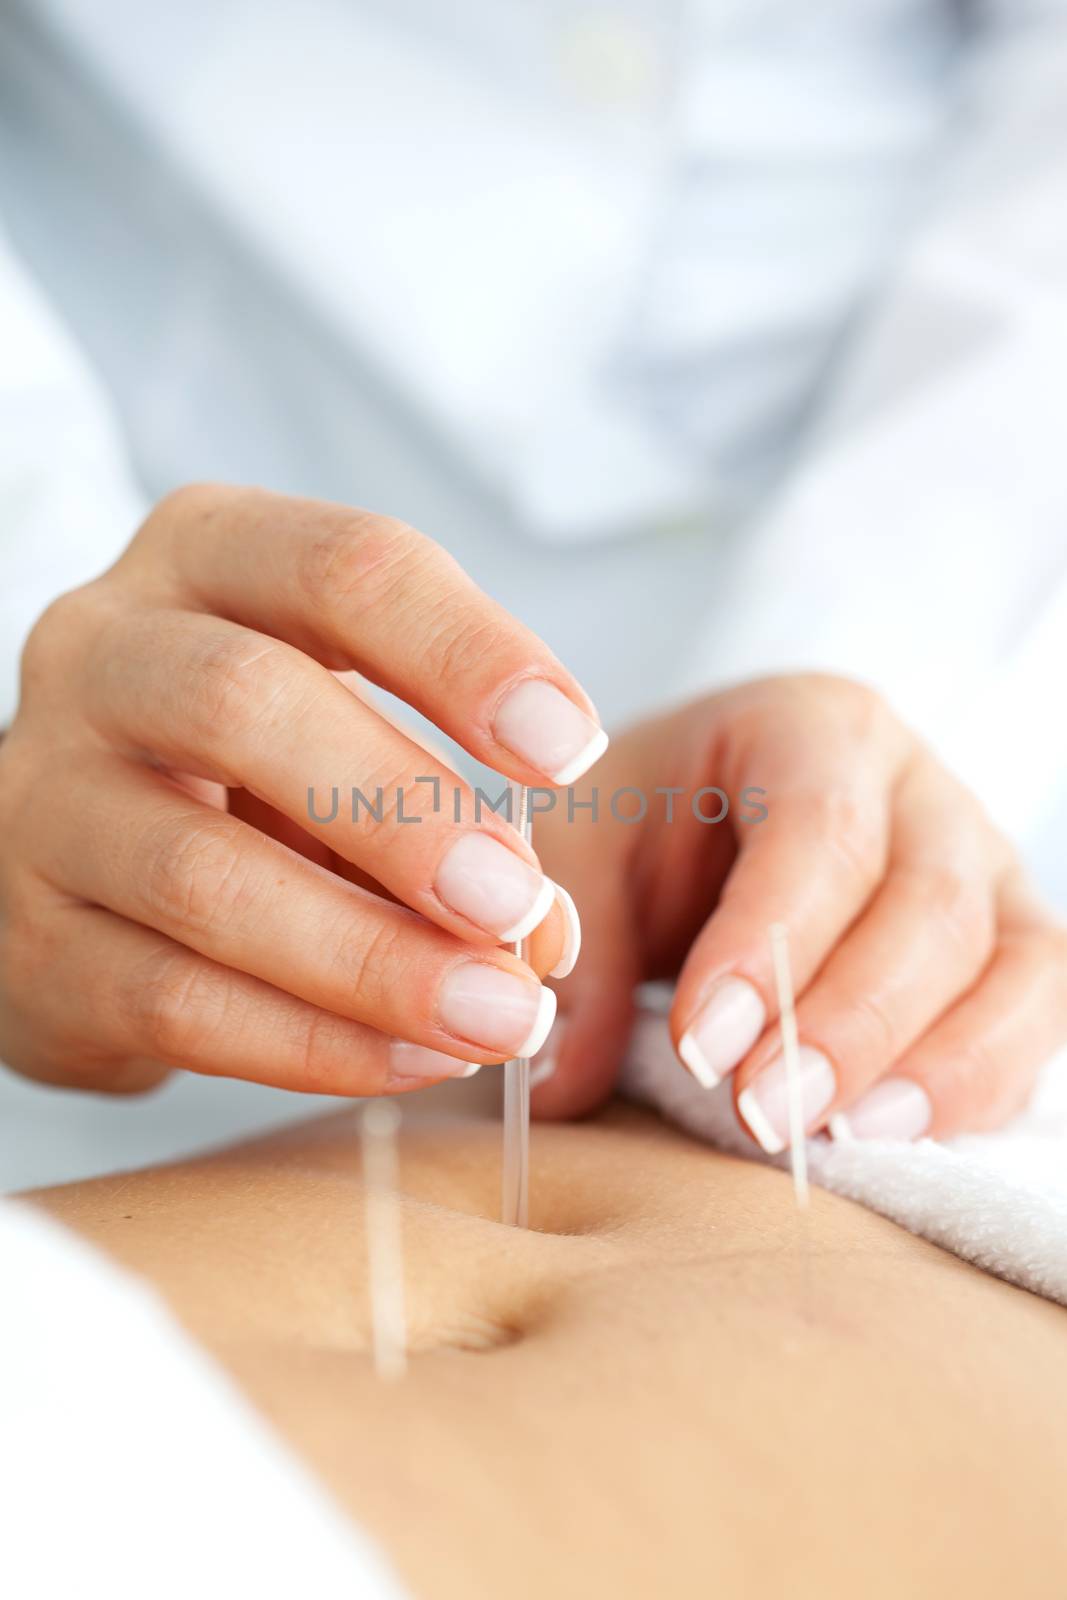 Doctor applying acupuncture on a patient's abdomen